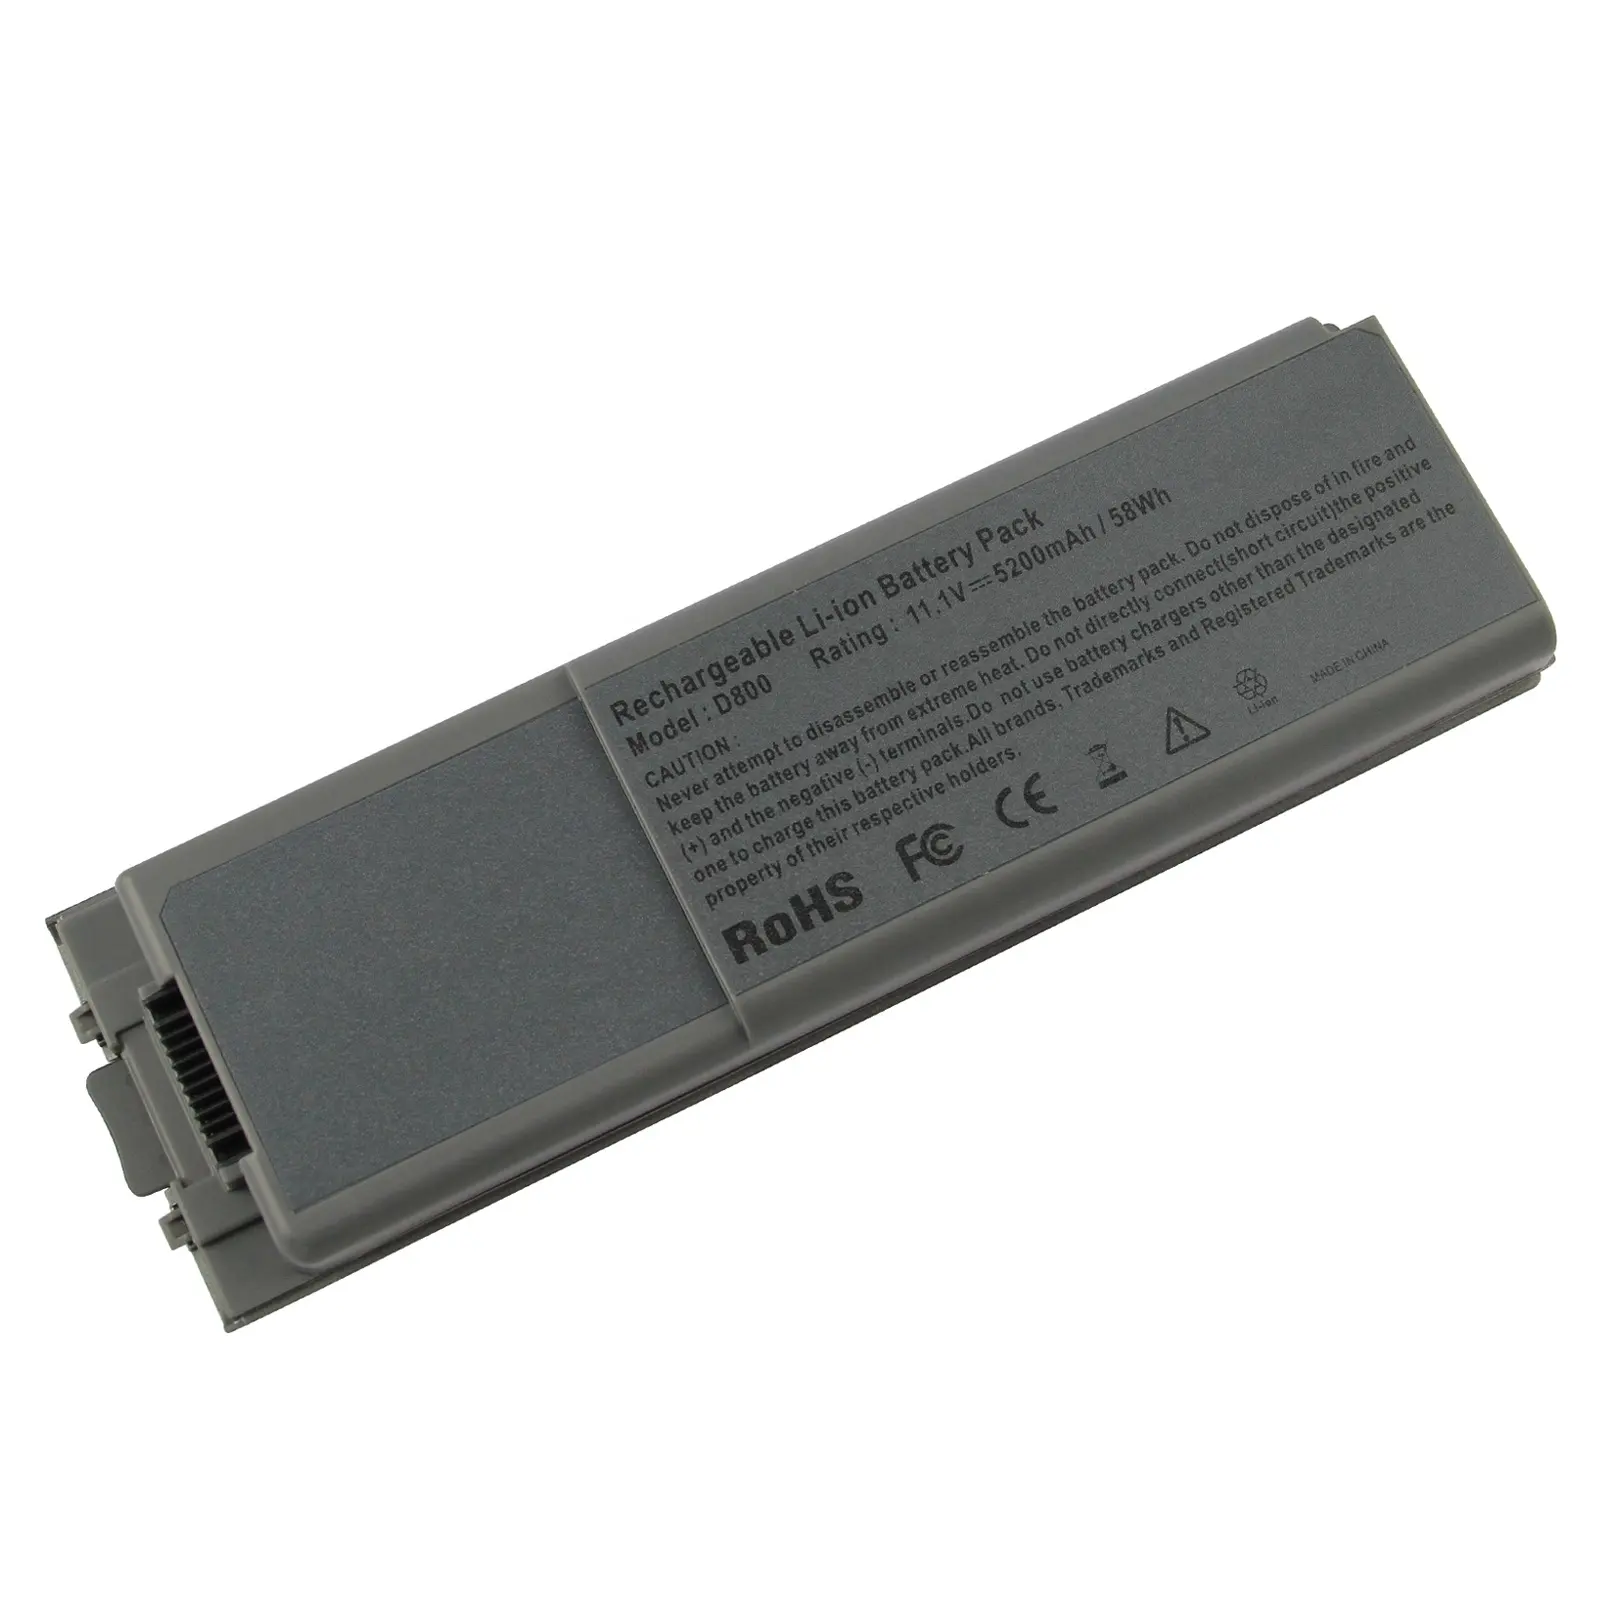 High power laptop battery for dell d800 replace d8500 8N544 01X284 BAT1297 5P140 5P144